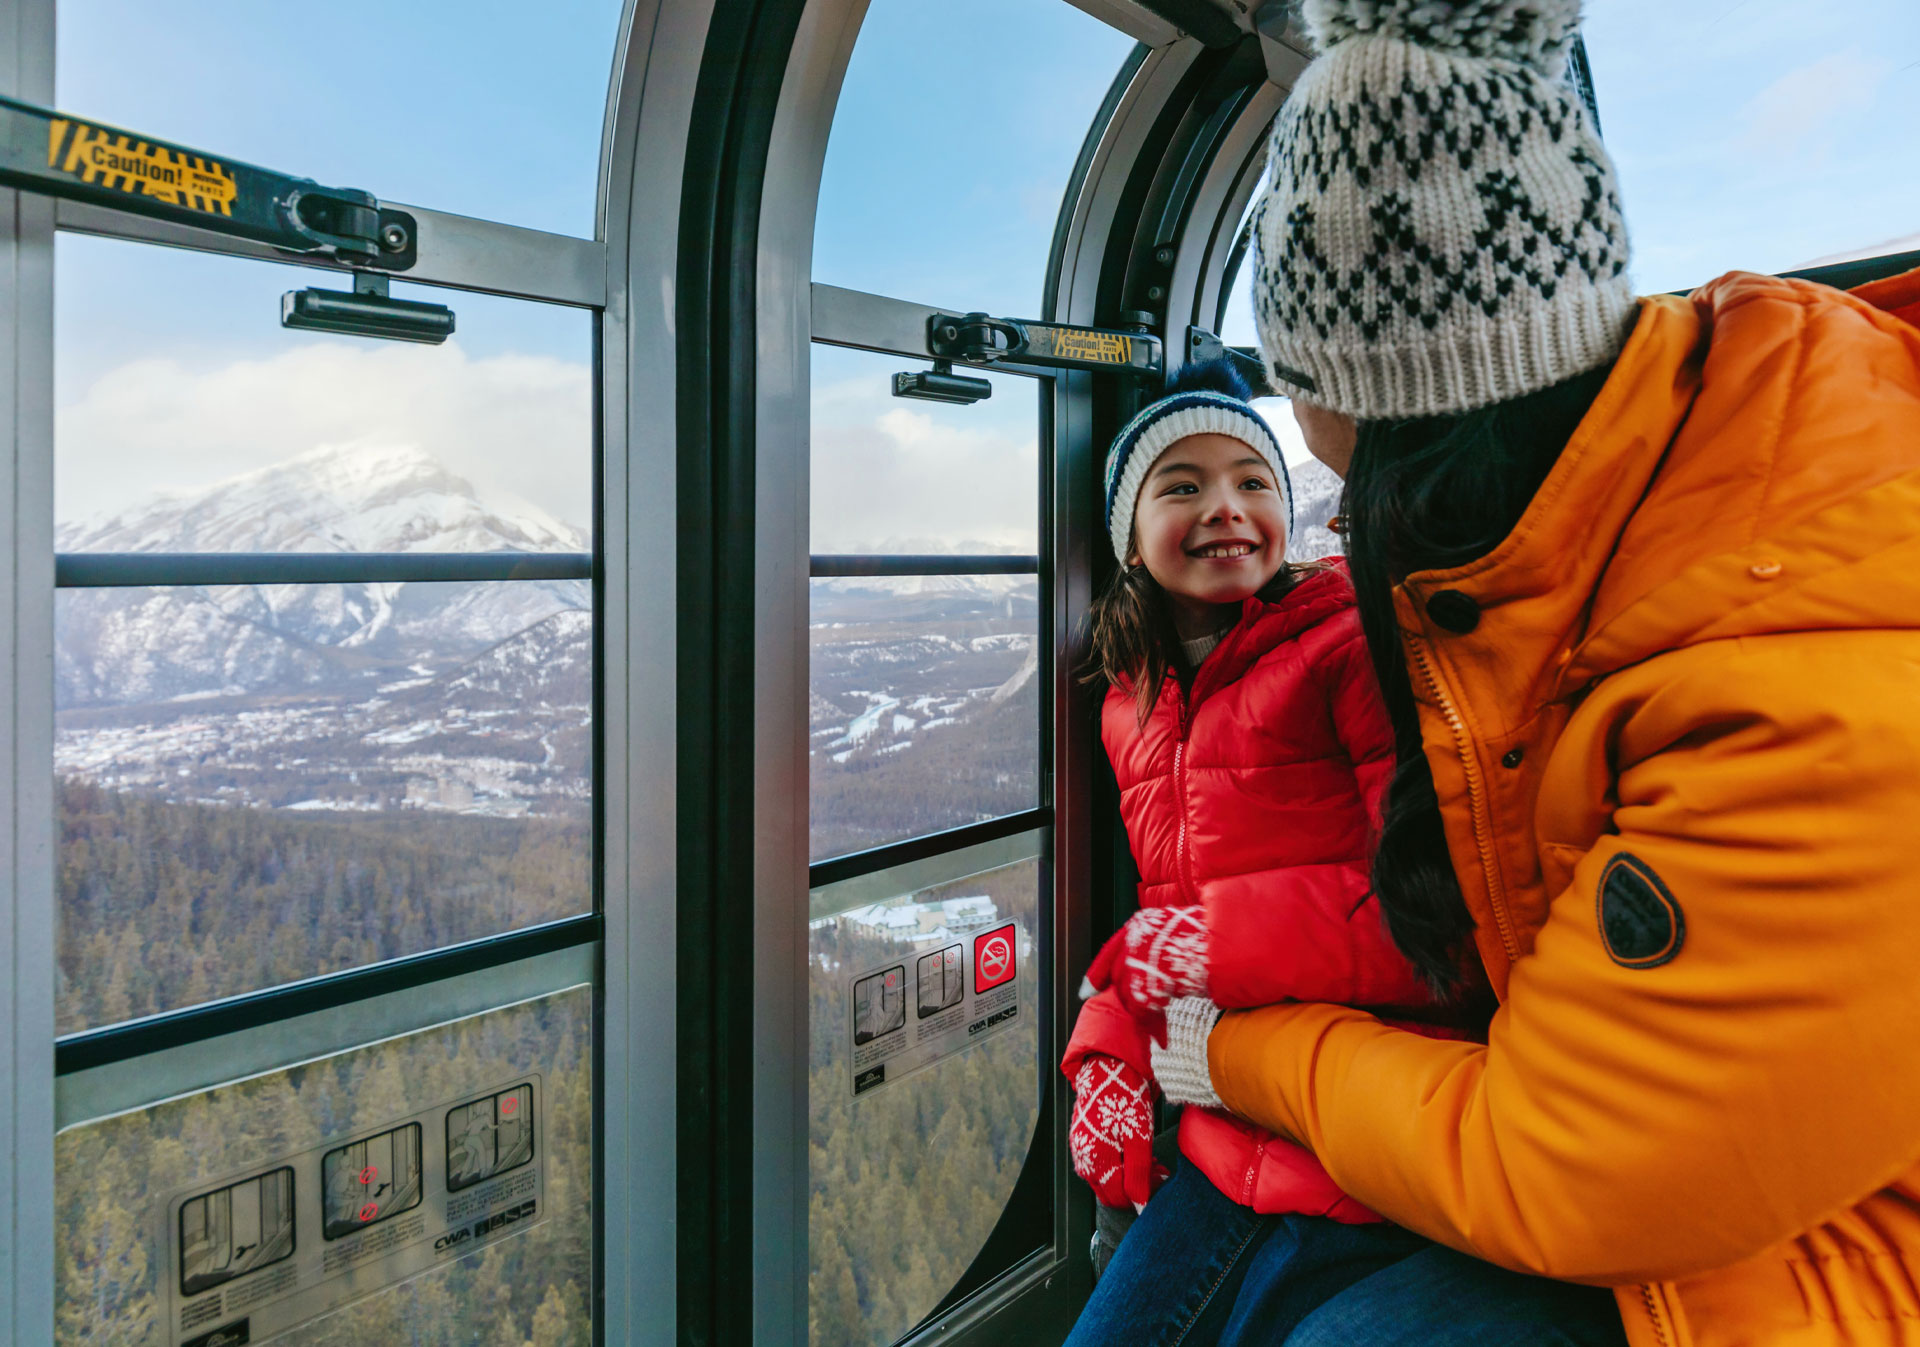 Mother and child riding the Banff Gondola